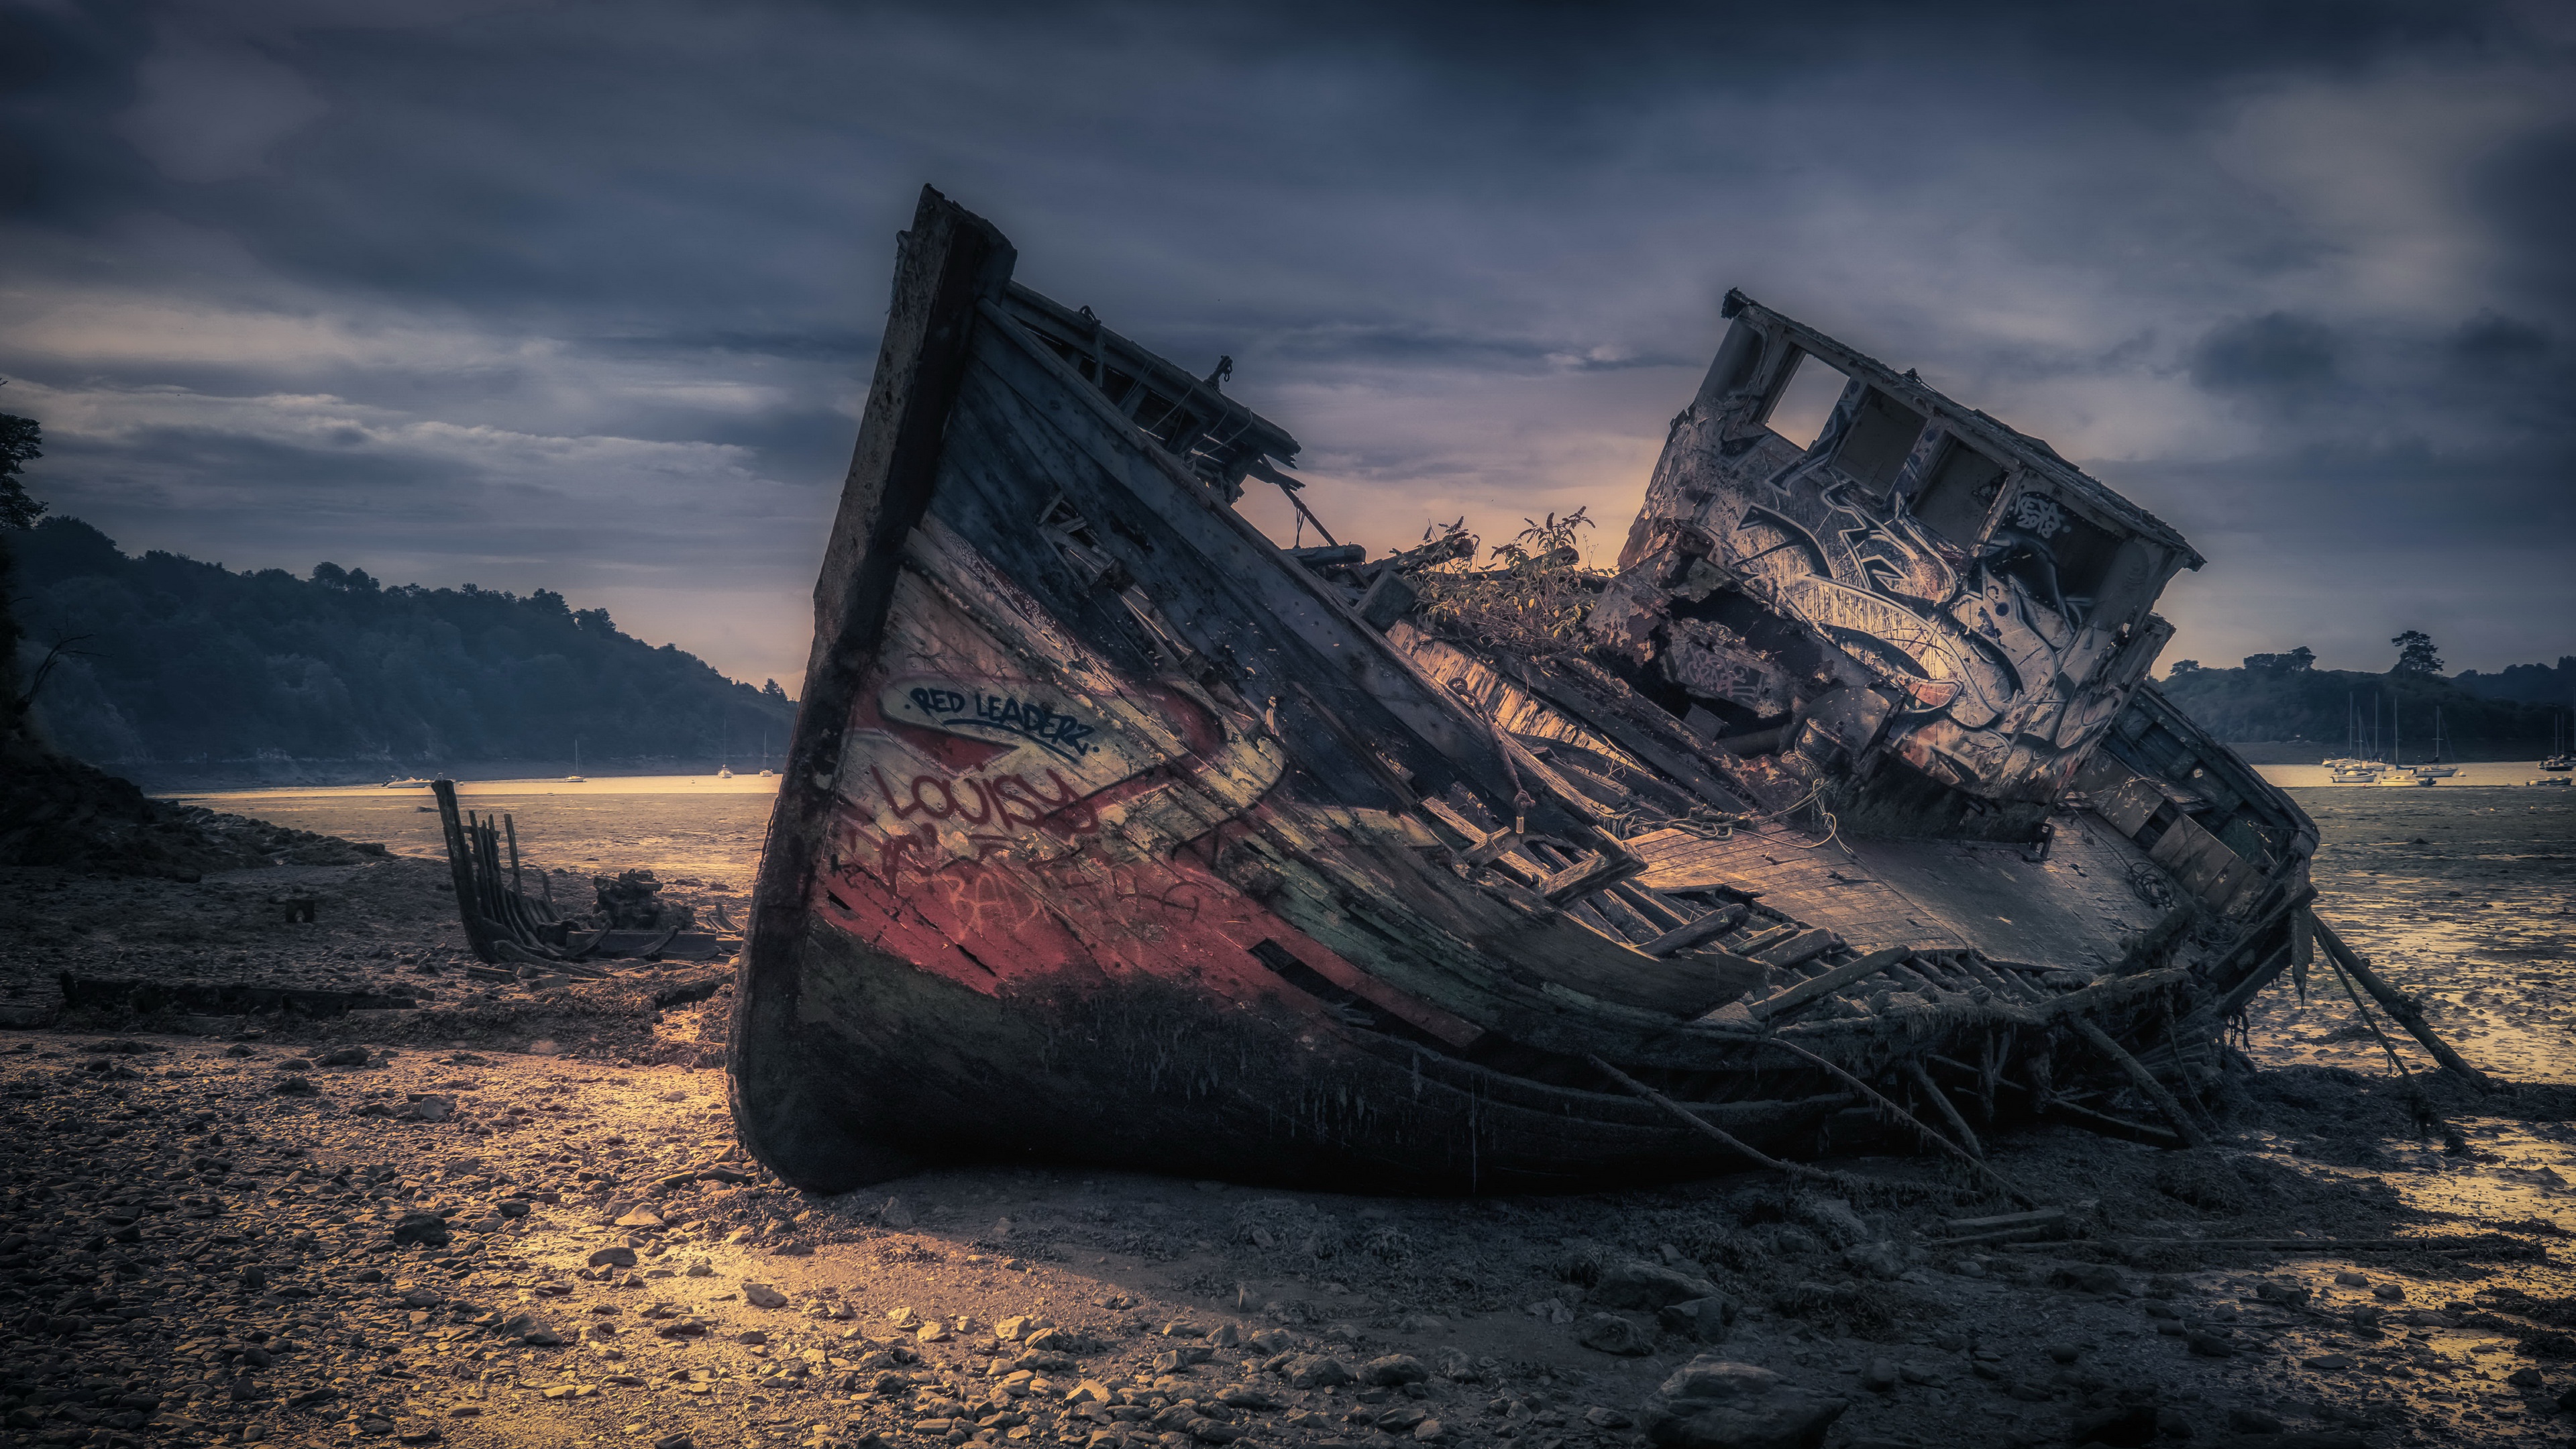 General 3840x2160 outdoors boat wreck old